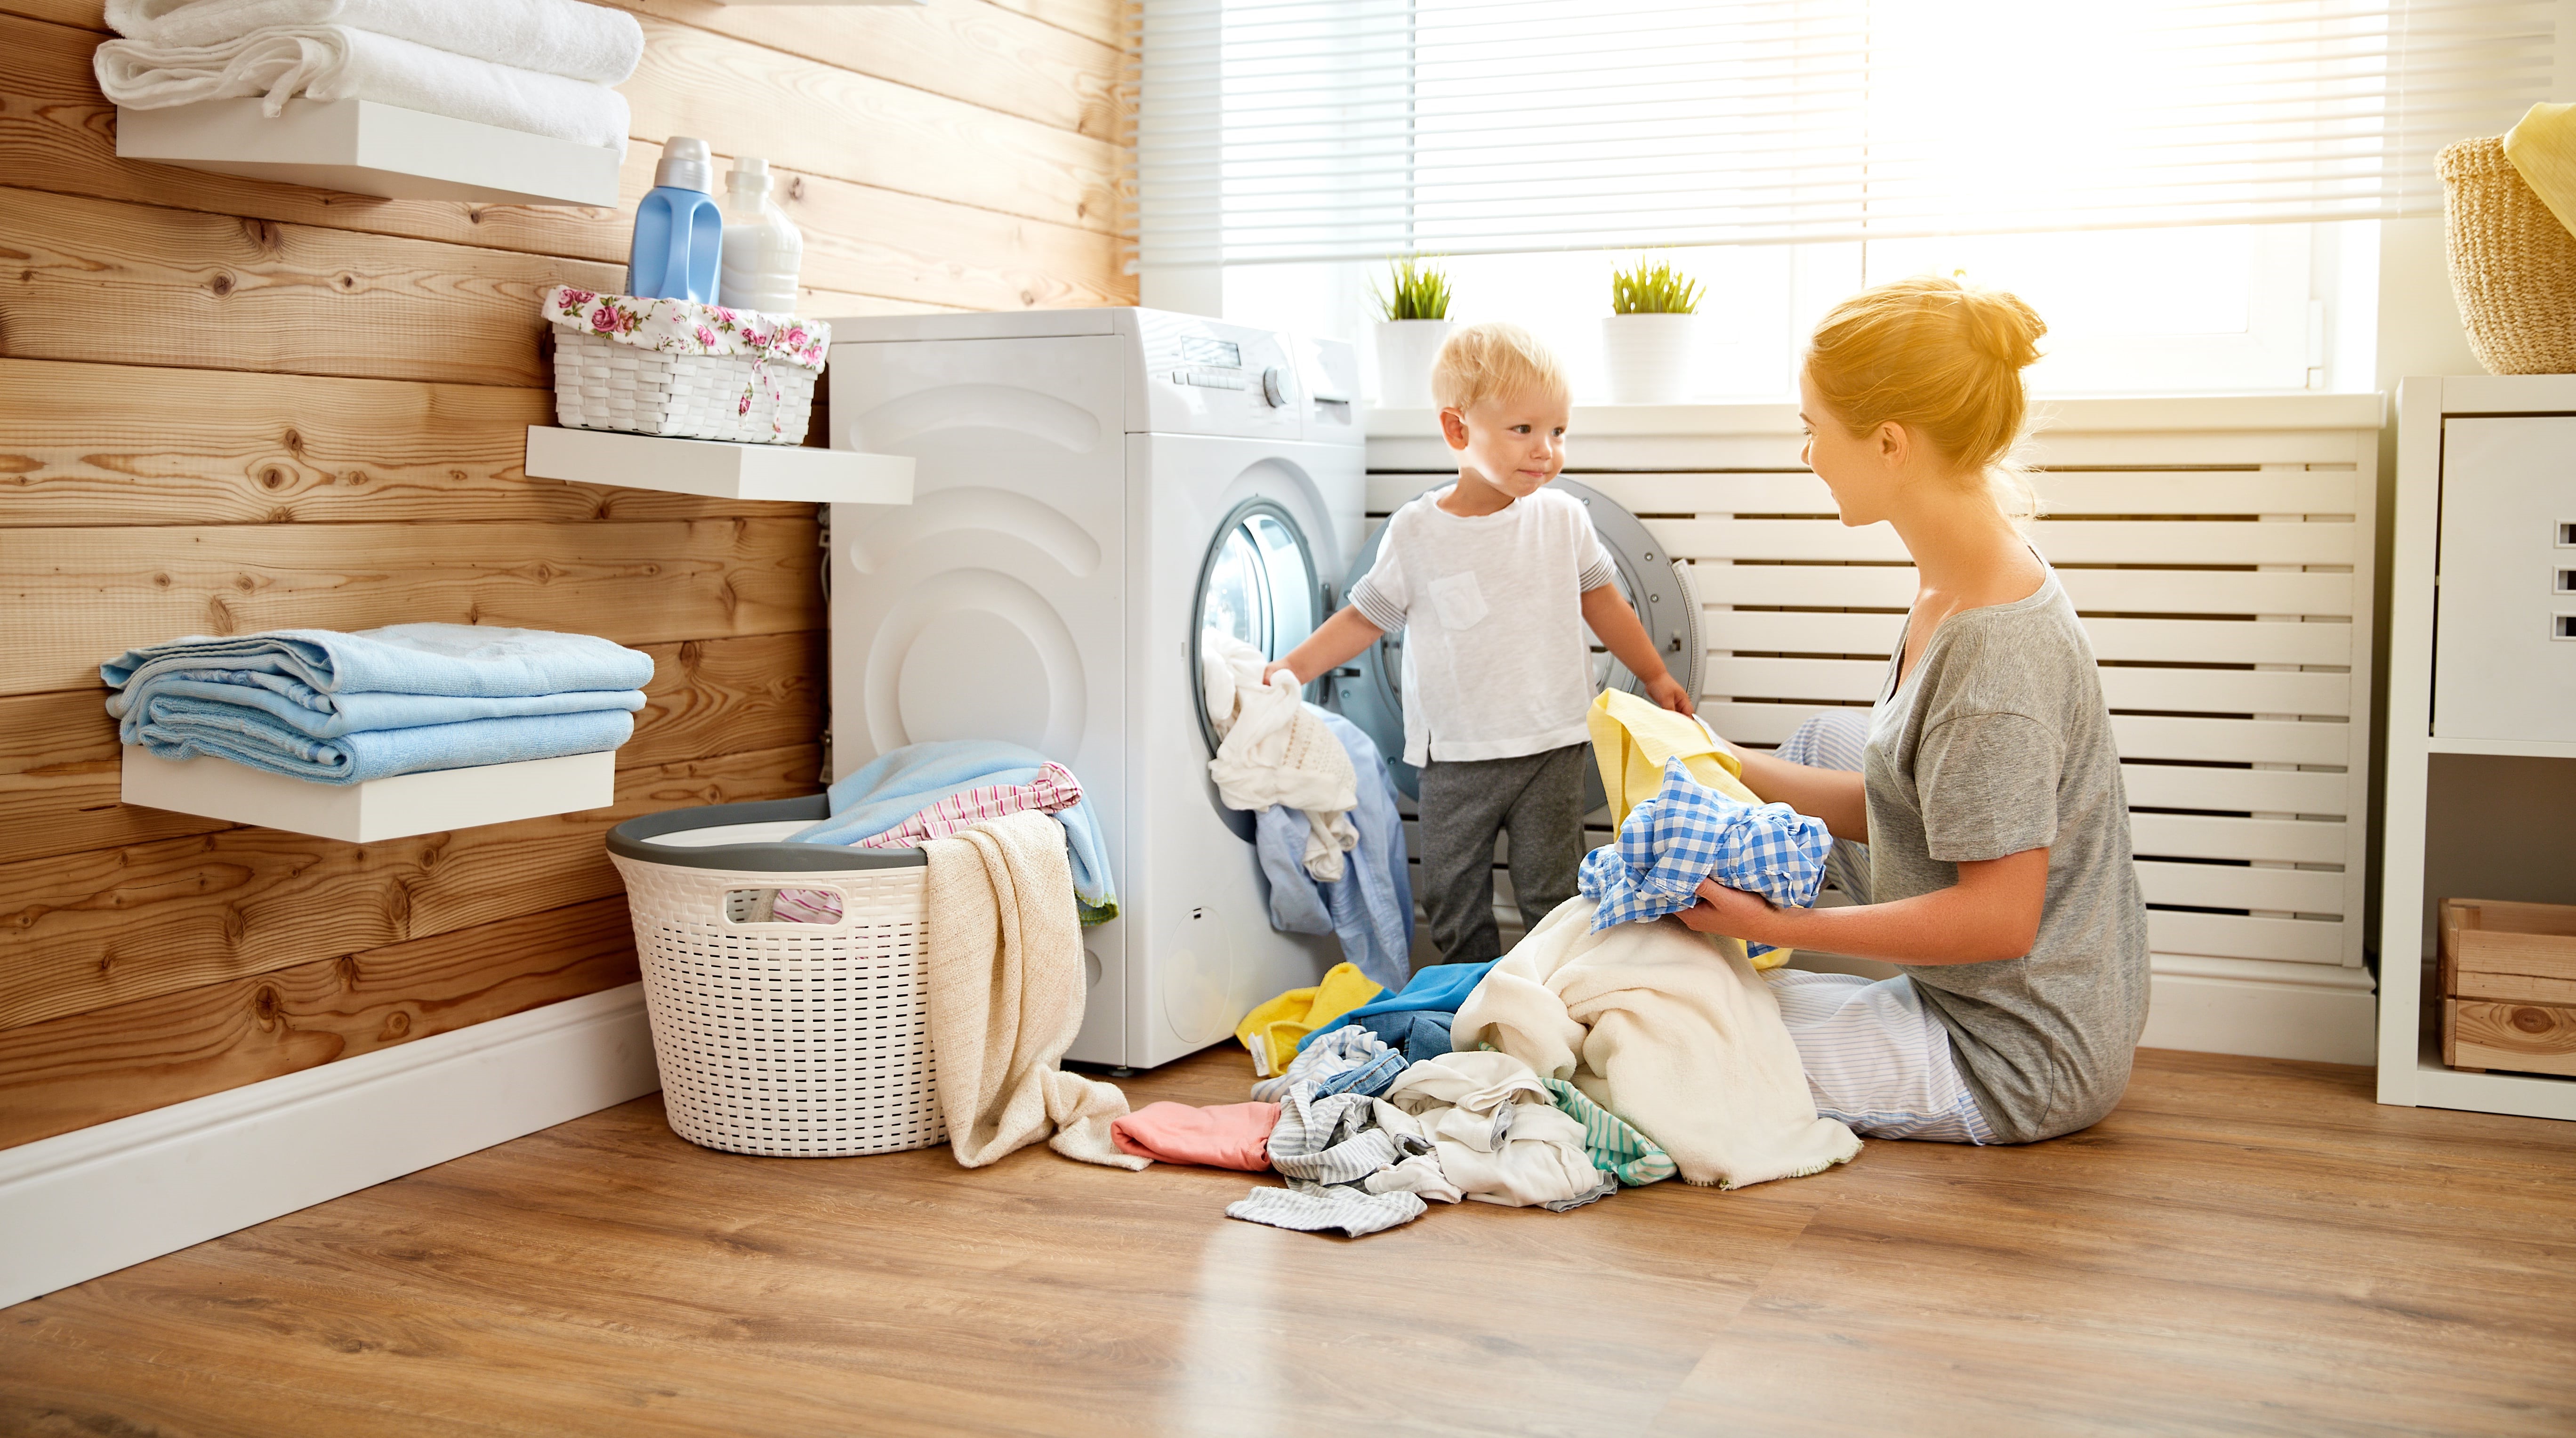 3 Reasons to Provide Laundry Services as an Amenity for Your Tenants